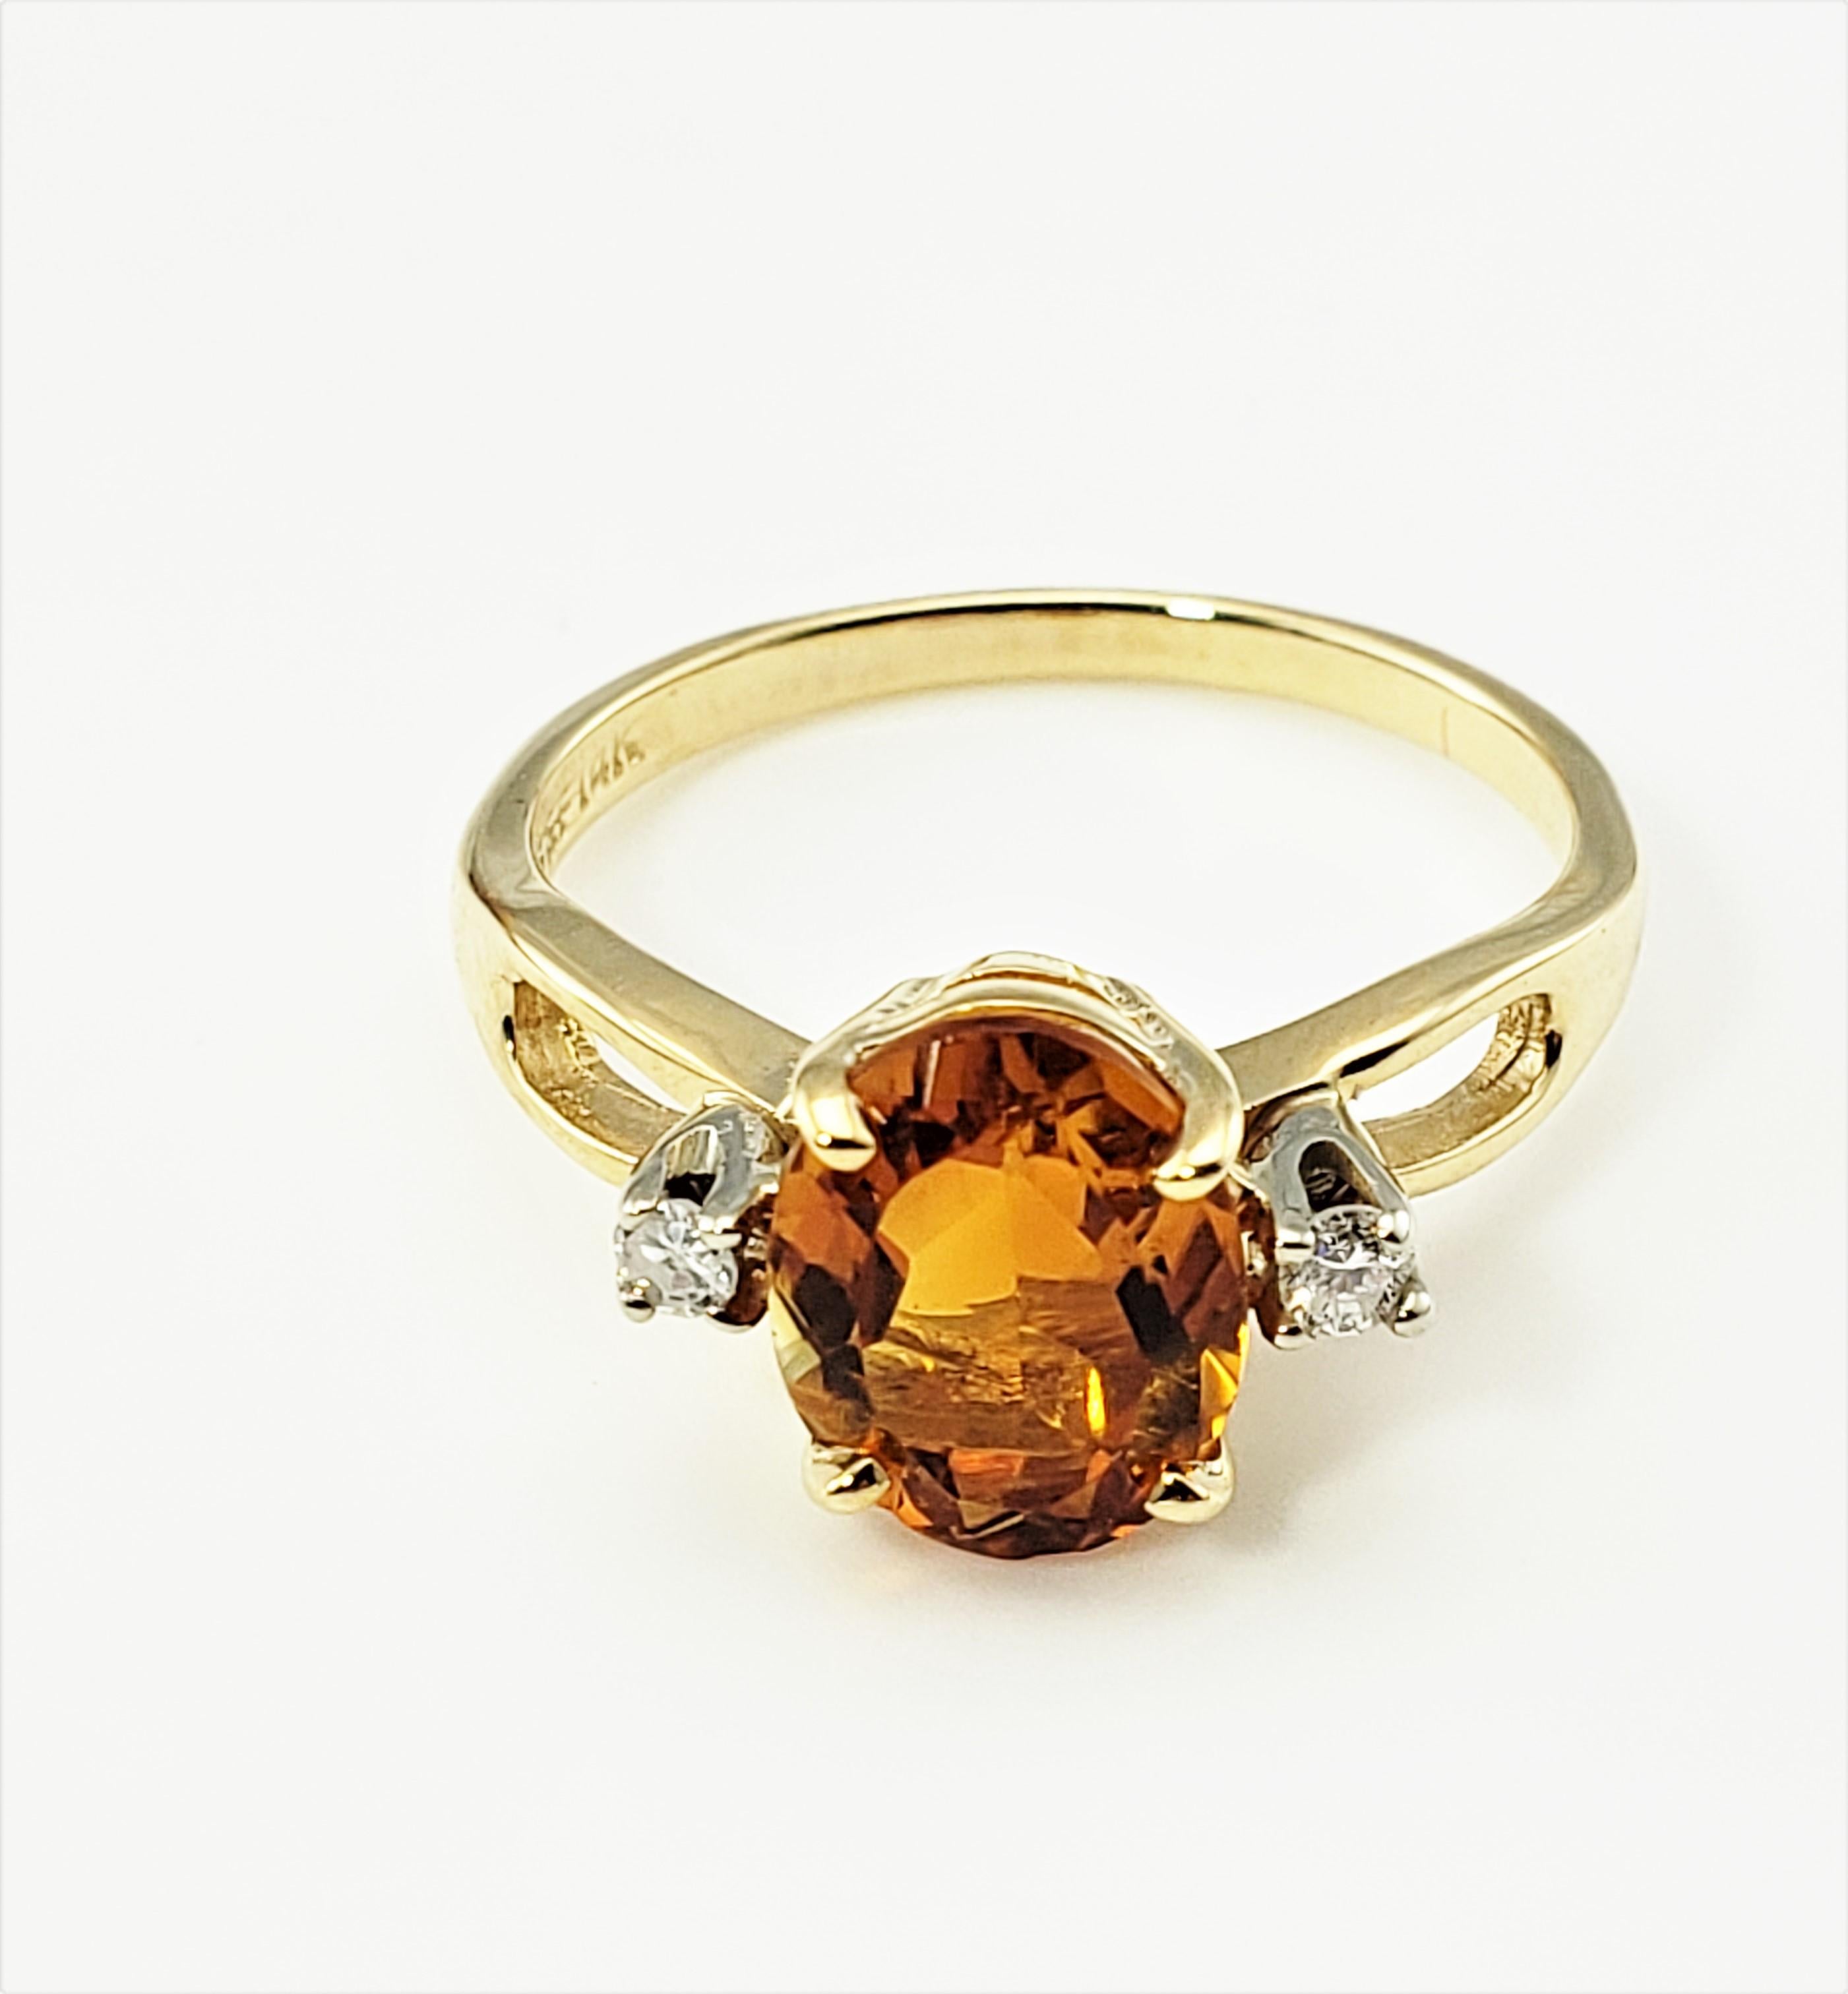 14 Karat Yellow Gold Citrine and Diamond Ring Size 6.25 GAI Certified-

This lovely ring features one oval citrine (9 mm x 8 mm) and two round brilliant cut diamond set in classic 14k yellow gold. Shank measures 1.5 mm.

Citrine carat weight: 2.32